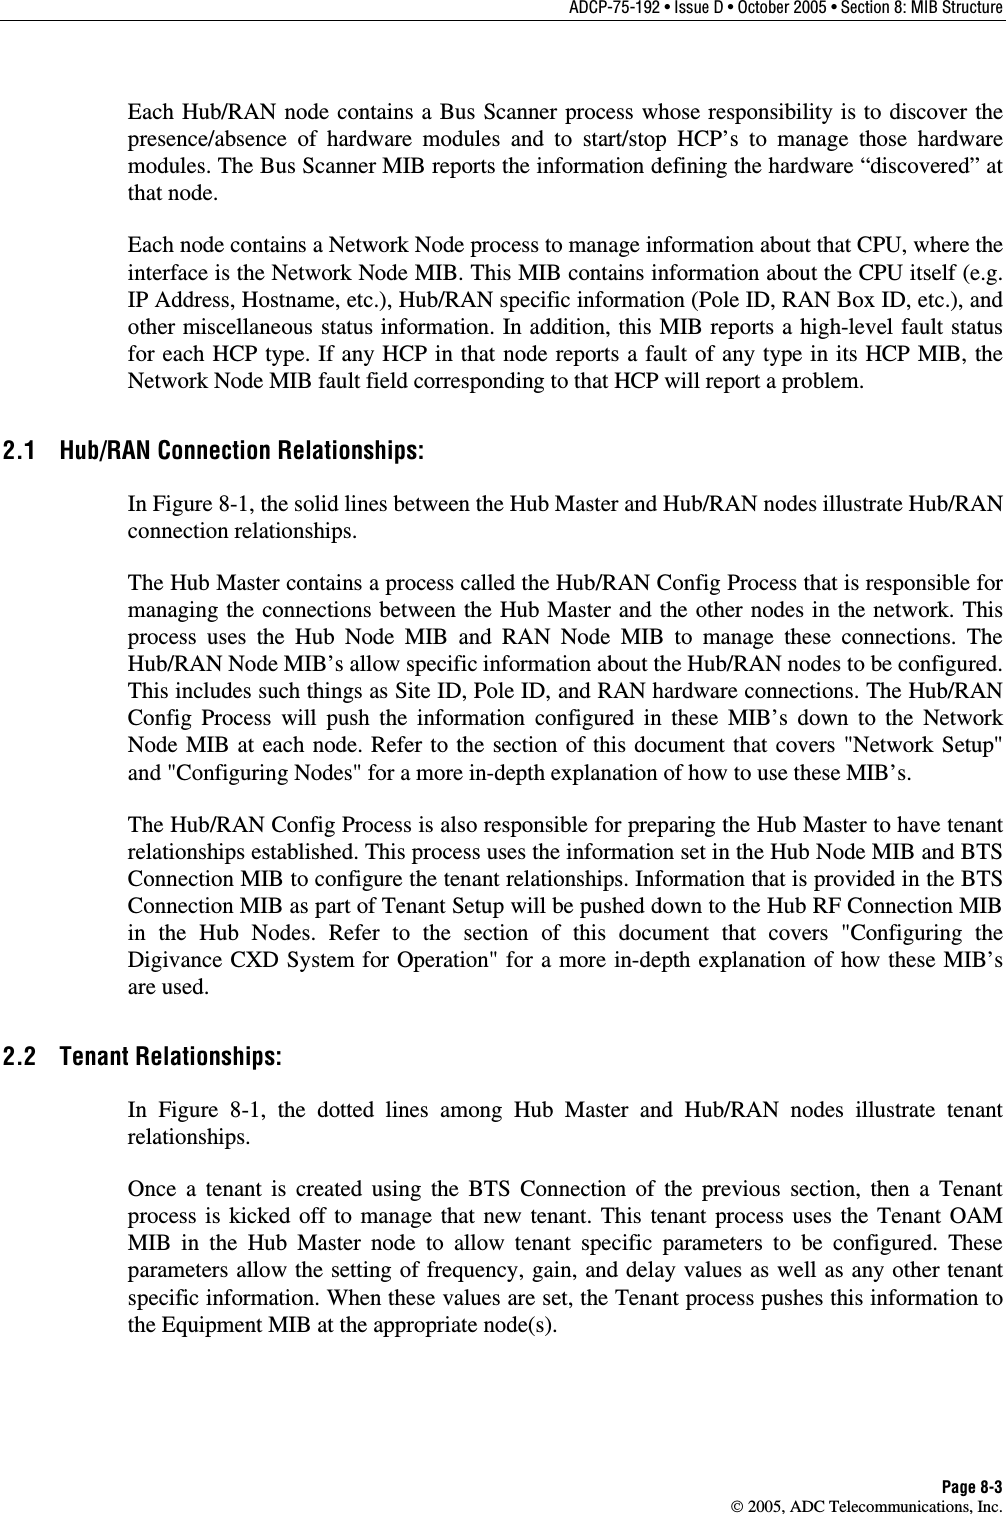 ADCP-75-192 • Issue D • October 2005 • Section 8: MIB Structure Page 8-3  2005, ADC Telecommunications, Inc. Each Hub/RAN node contains a Bus Scanner process whose responsibility is to discover the presence/absence of hardware modules and to start/stop HCP’s to manage those hardware modules. The Bus Scanner MIB reports the information defining the hardware “discovered” at that node. Each node contains a Network Node process to manage information about that CPU, where the interface is the Network Node MIB. This MIB contains information about the CPU itself (e.g. IP Address, Hostname, etc.), Hub/RAN specific information (Pole ID, RAN Box ID, etc.), and other miscellaneous status information. In addition, this MIB reports a high-level fault status for each HCP type. If any HCP in that node reports a fault of any type in its HCP MIB, the Network Node MIB fault field corresponding to that HCP will report a problem. 2.1  Hub/RAN Connection Relationships: In Figure 8-1, the solid lines between the Hub Master and Hub/RAN nodes illustrate Hub/RAN connection relationships. The Hub Master contains a process called the Hub/RAN Config Process that is responsible for managing the connections between the Hub Master and the other nodes in the network. This process uses the Hub Node MIB and RAN Node MIB to manage these connections. The Hub/RAN Node MIB’s allow specific information about the Hub/RAN nodes to be configured. This includes such things as Site ID, Pole ID, and RAN hardware connections. The Hub/RAN Config Process will push the information configured in these MIB’s down to the Network Node MIB at each node. Refer to the section of this document that covers &quot;Network Setup&quot; and &quot;Configuring Nodes&quot; for a more in-depth explanation of how to use these MIB’s. The Hub/RAN Config Process is also responsible for preparing the Hub Master to have tenant relationships established. This process uses the information set in the Hub Node MIB and BTS Connection MIB to configure the tenant relationships. Information that is provided in the BTS Connection MIB as part of Tenant Setup will be pushed down to the Hub RF Connection MIB in the Hub Nodes. Refer to the section of this document that covers &quot;Configuring the Digivance CXD System for Operation&quot; for a more in-depth explanation of how these MIB’s are used. 2.2 Tenant Relationships: In Figure 8-1, the dotted lines among Hub Master and Hub/RAN nodes illustrate tenant relationships. Once a tenant is created using the BTS Connection of the previous section, then a Tenant process is kicked off to manage that new tenant. This tenant process uses the Tenant OAM MIB in the Hub Master node to allow tenant specific parameters to be configured. These parameters allow the setting of frequency, gain, and delay values as well as any other tenant specific information. When these values are set, the Tenant process pushes this information to the Equipment MIB at the appropriate node(s).  